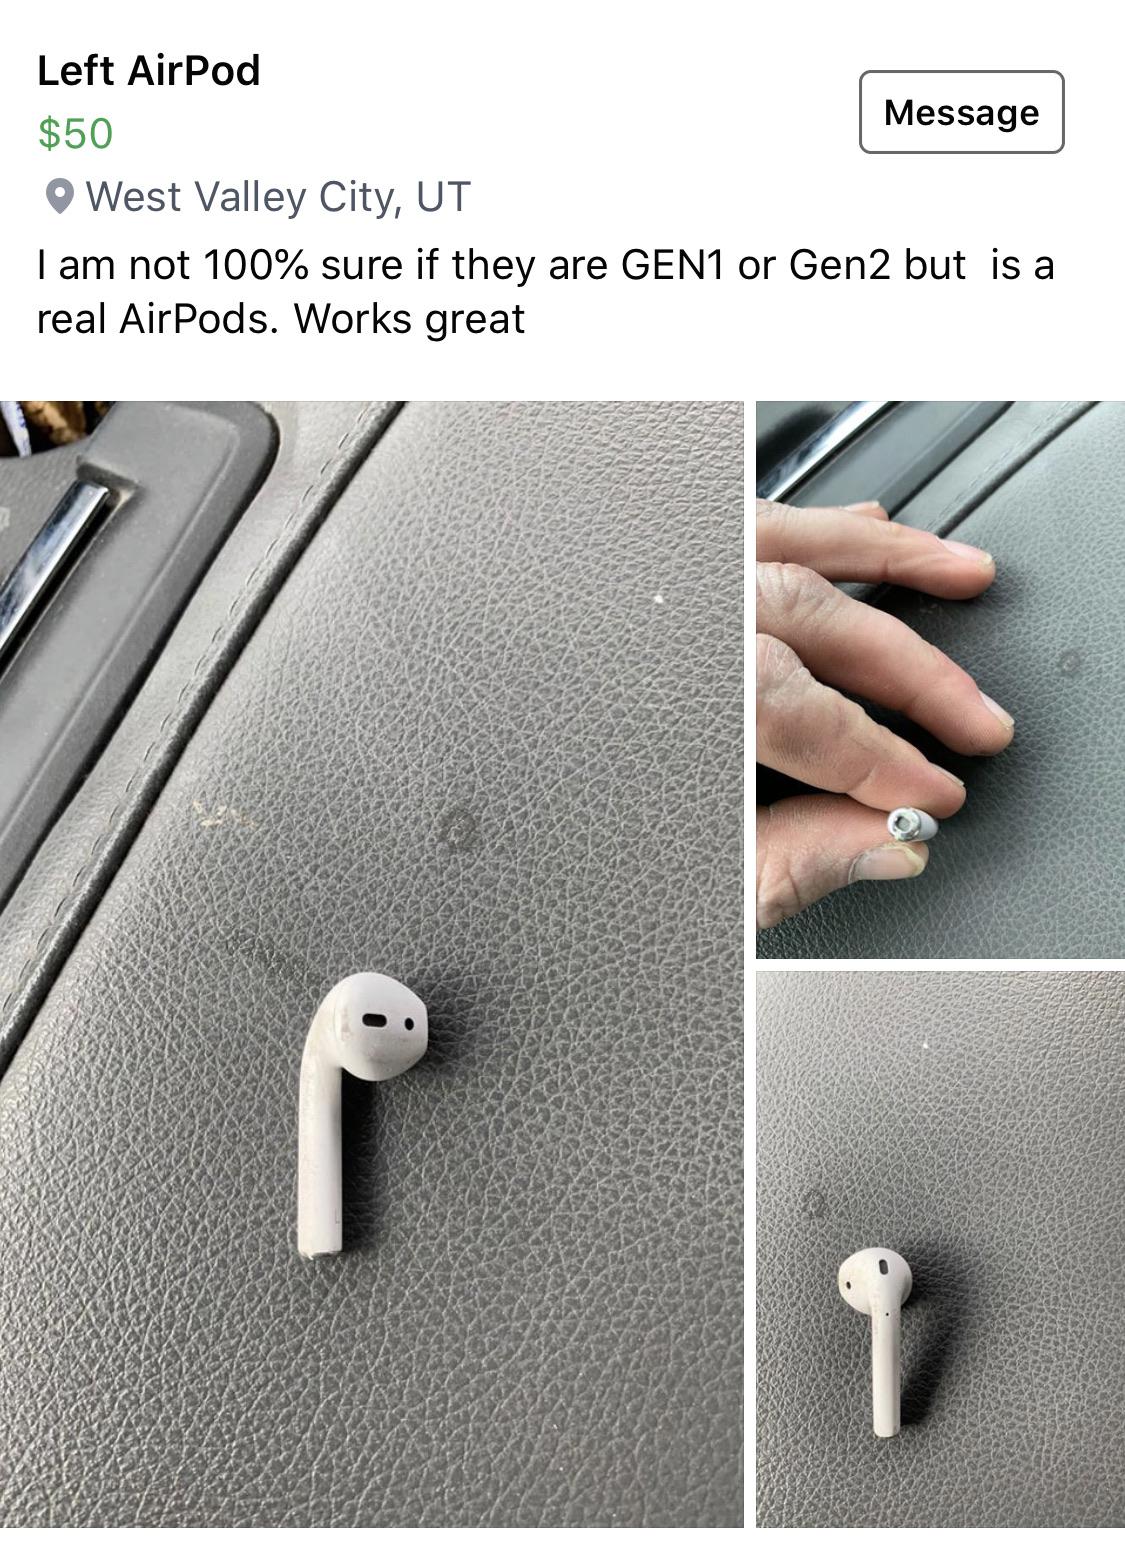 angle - Left AirPod Message $50 West Valley City, Ut I am not 100% sure if they are GEN1 or Gen2 but is a real AirPods. Works great